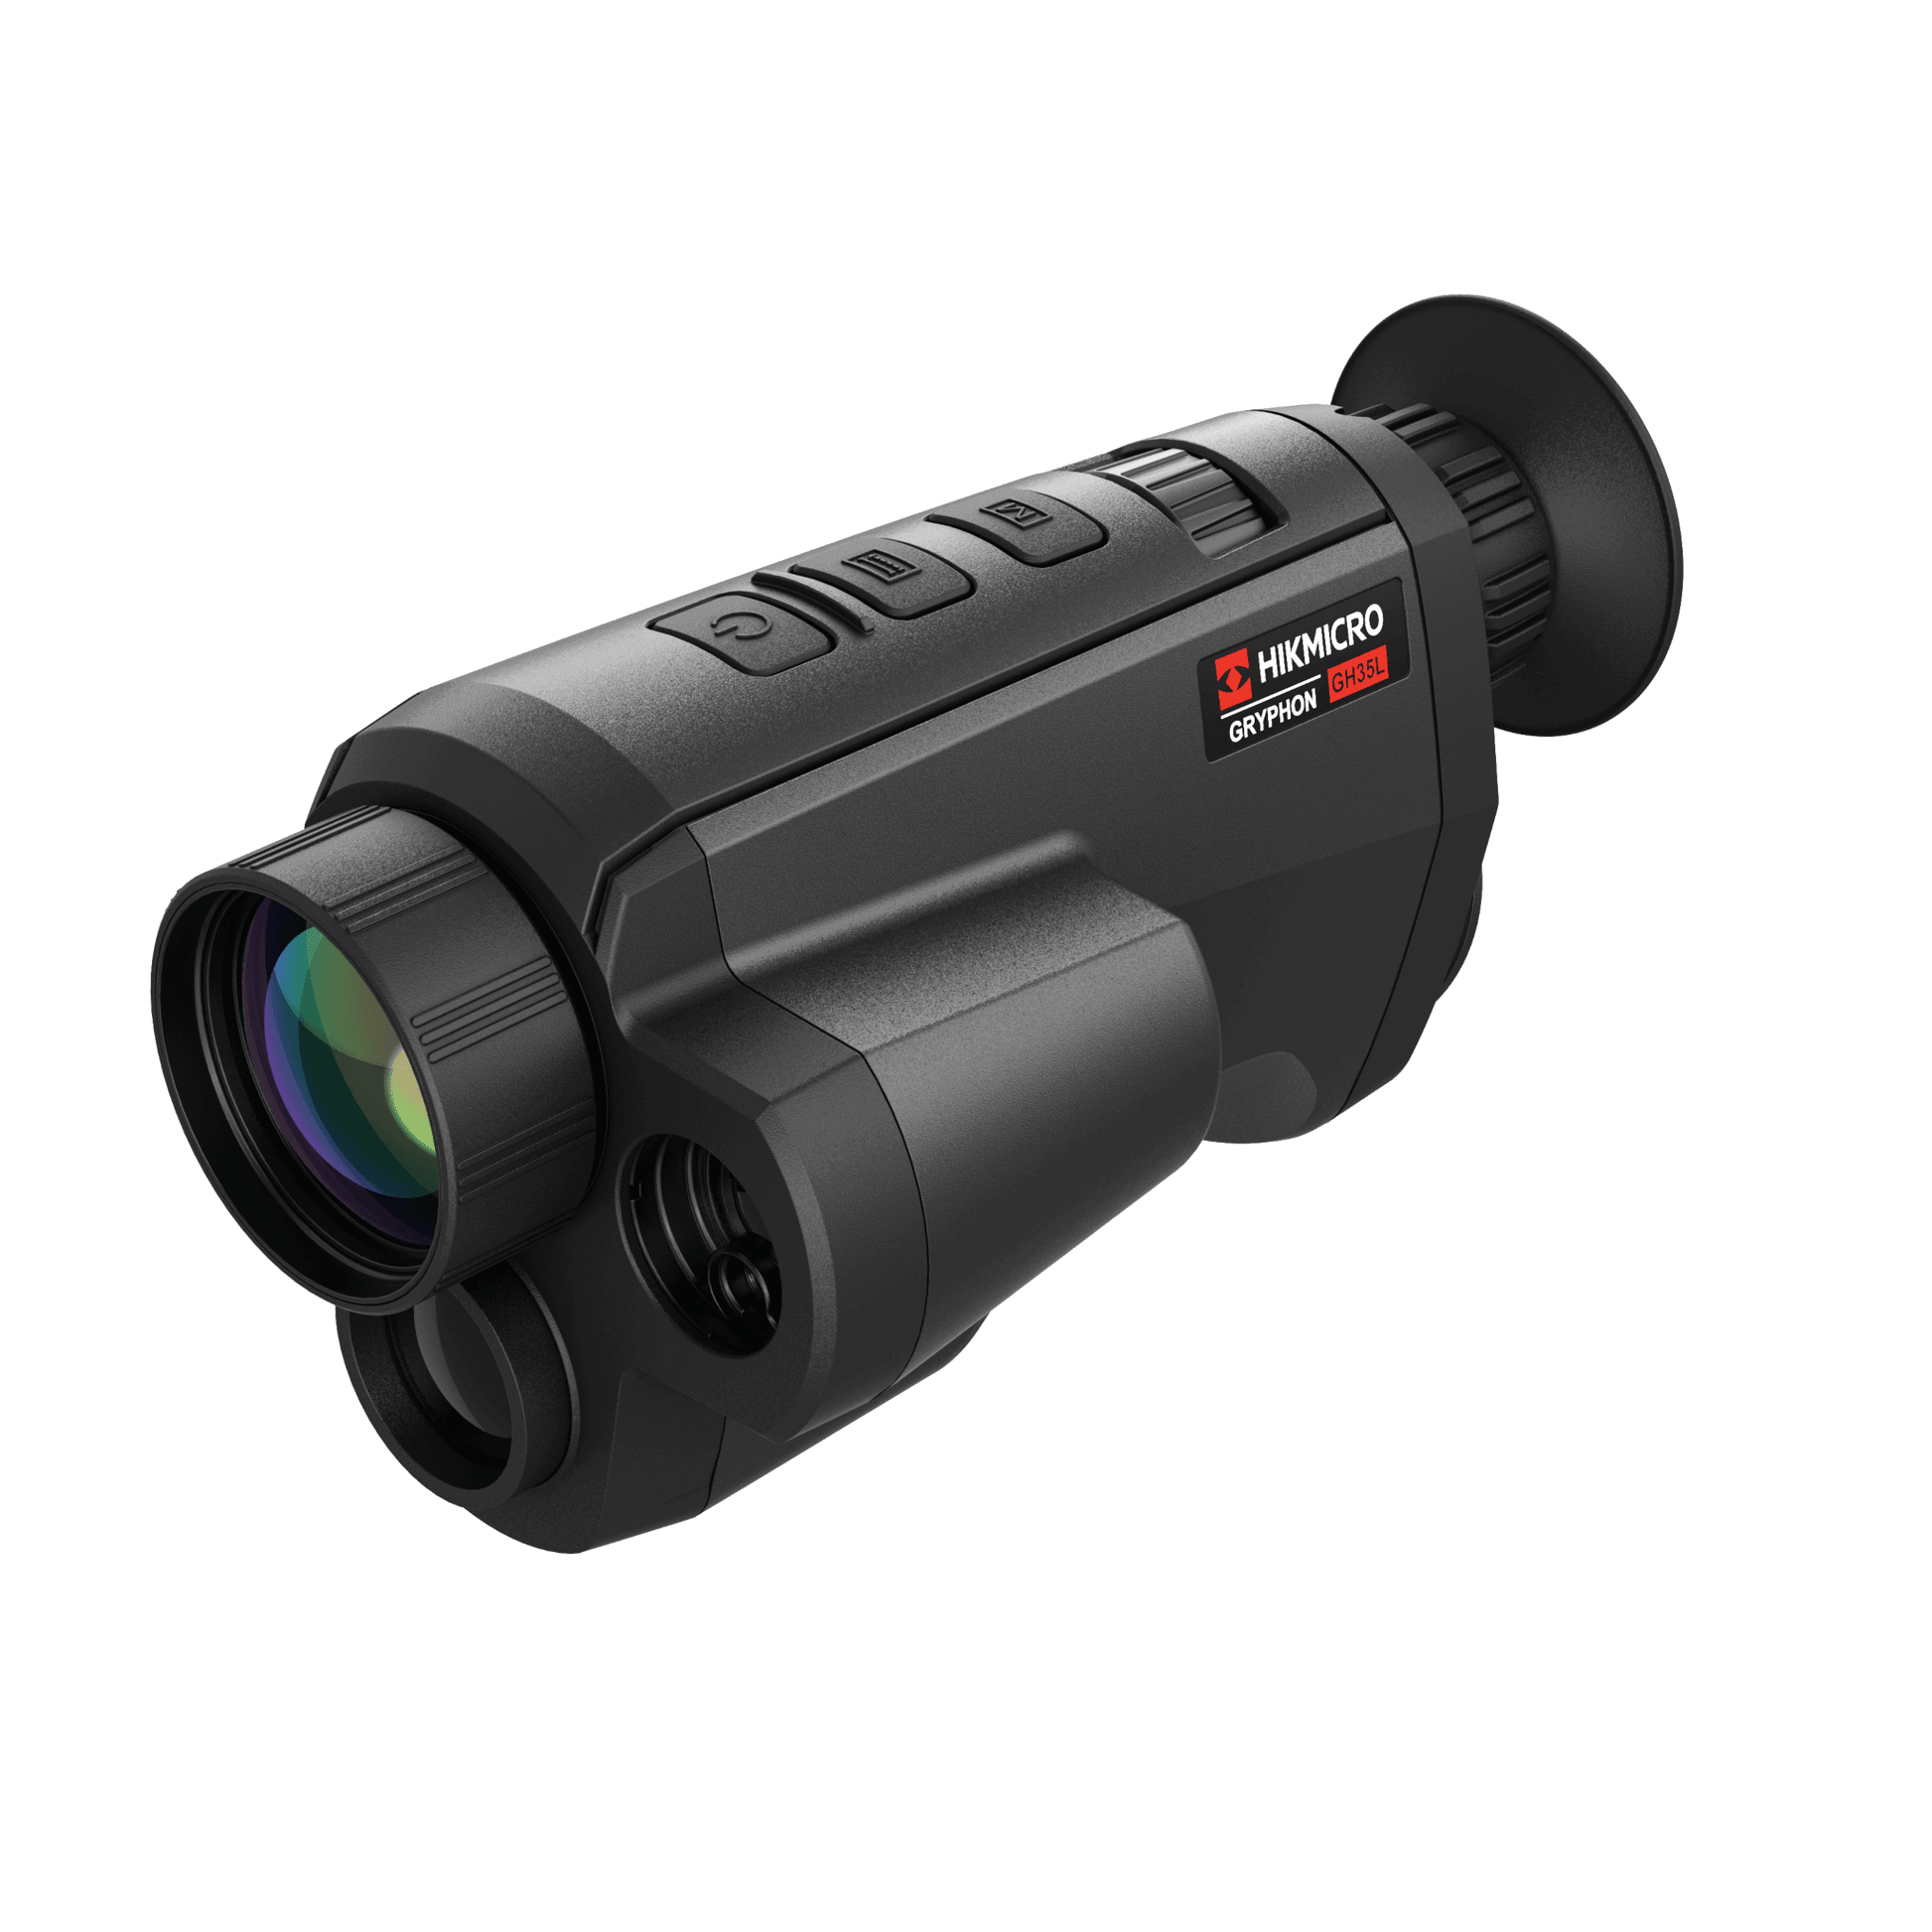 Cape Thermal imaging monocular for sale - HikMicro Gryphon GH35L Handheld thermal monocular front right view with laser range finder and eye piece